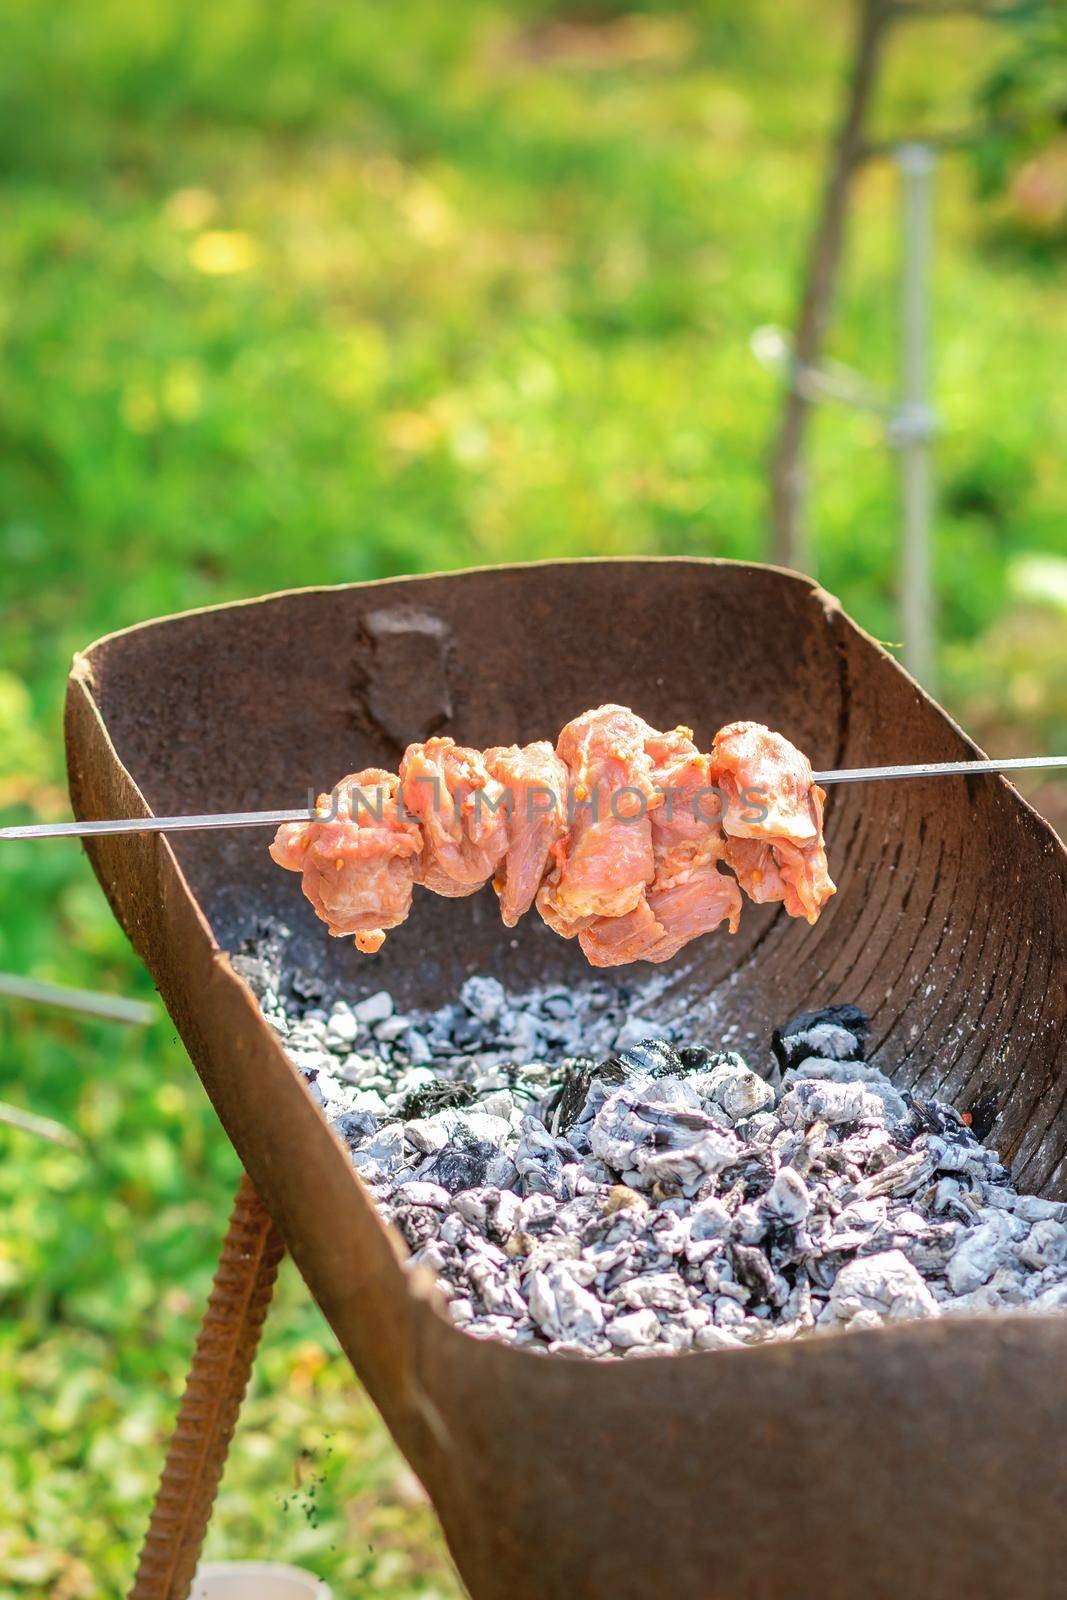 Hands of man prepares barbecue meat on skewer by grill on fire outdoors